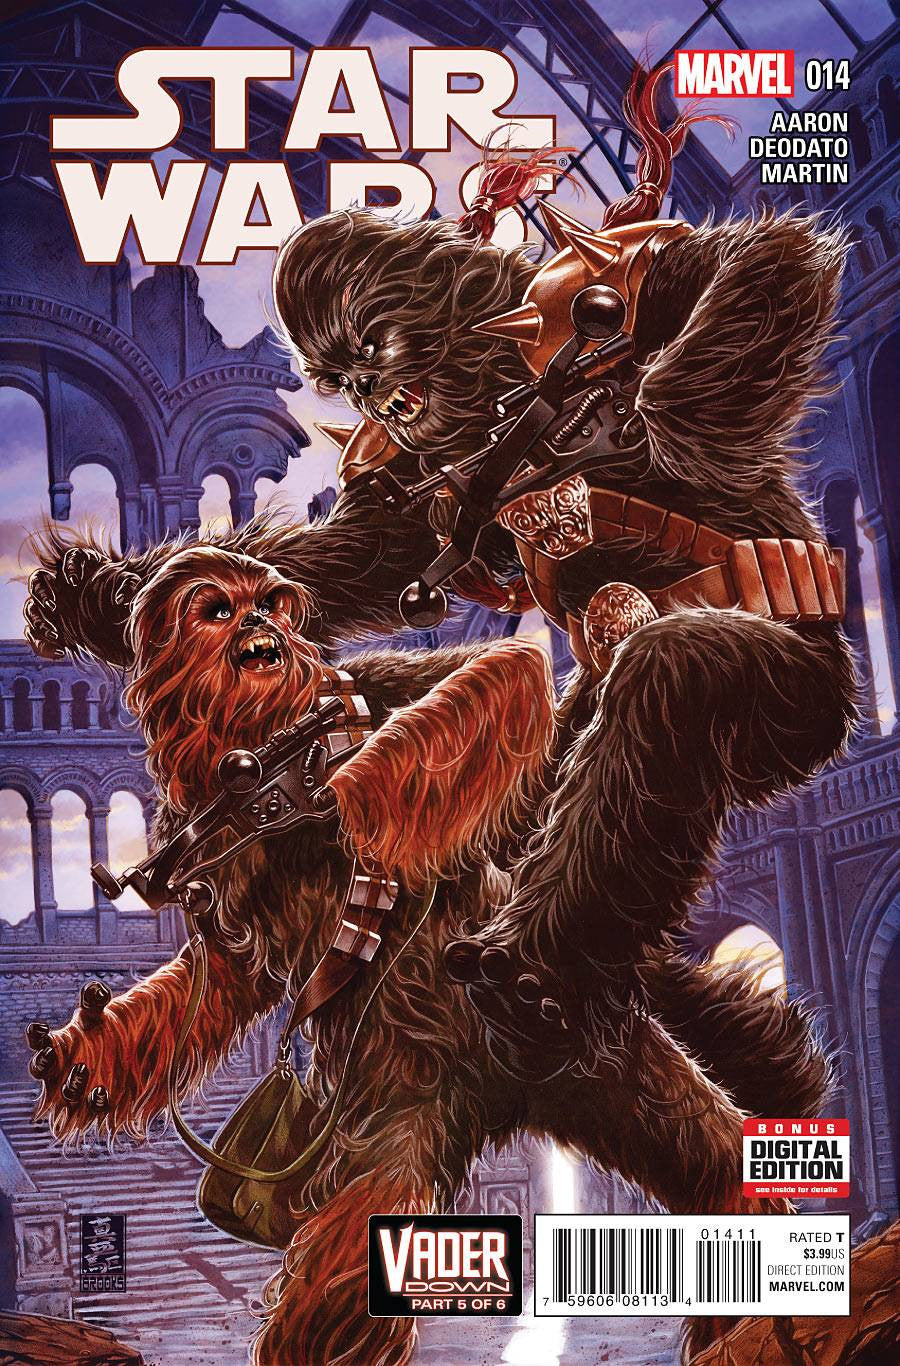 STAR WARS #14 VDWN COVER